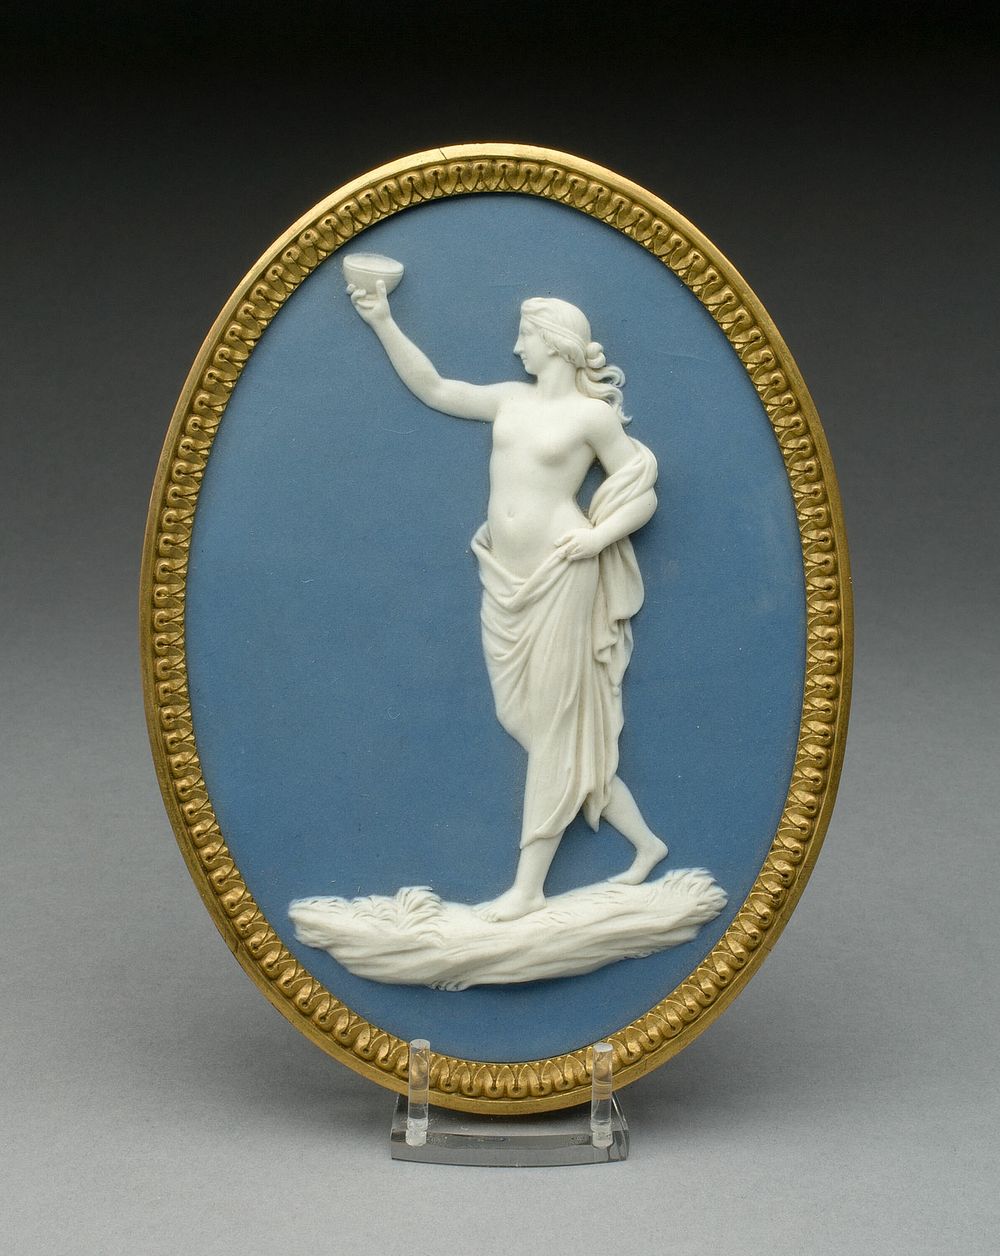 Plaque with Bacchanalian Figure by Wedgwood Manufactory (Manufacturer)